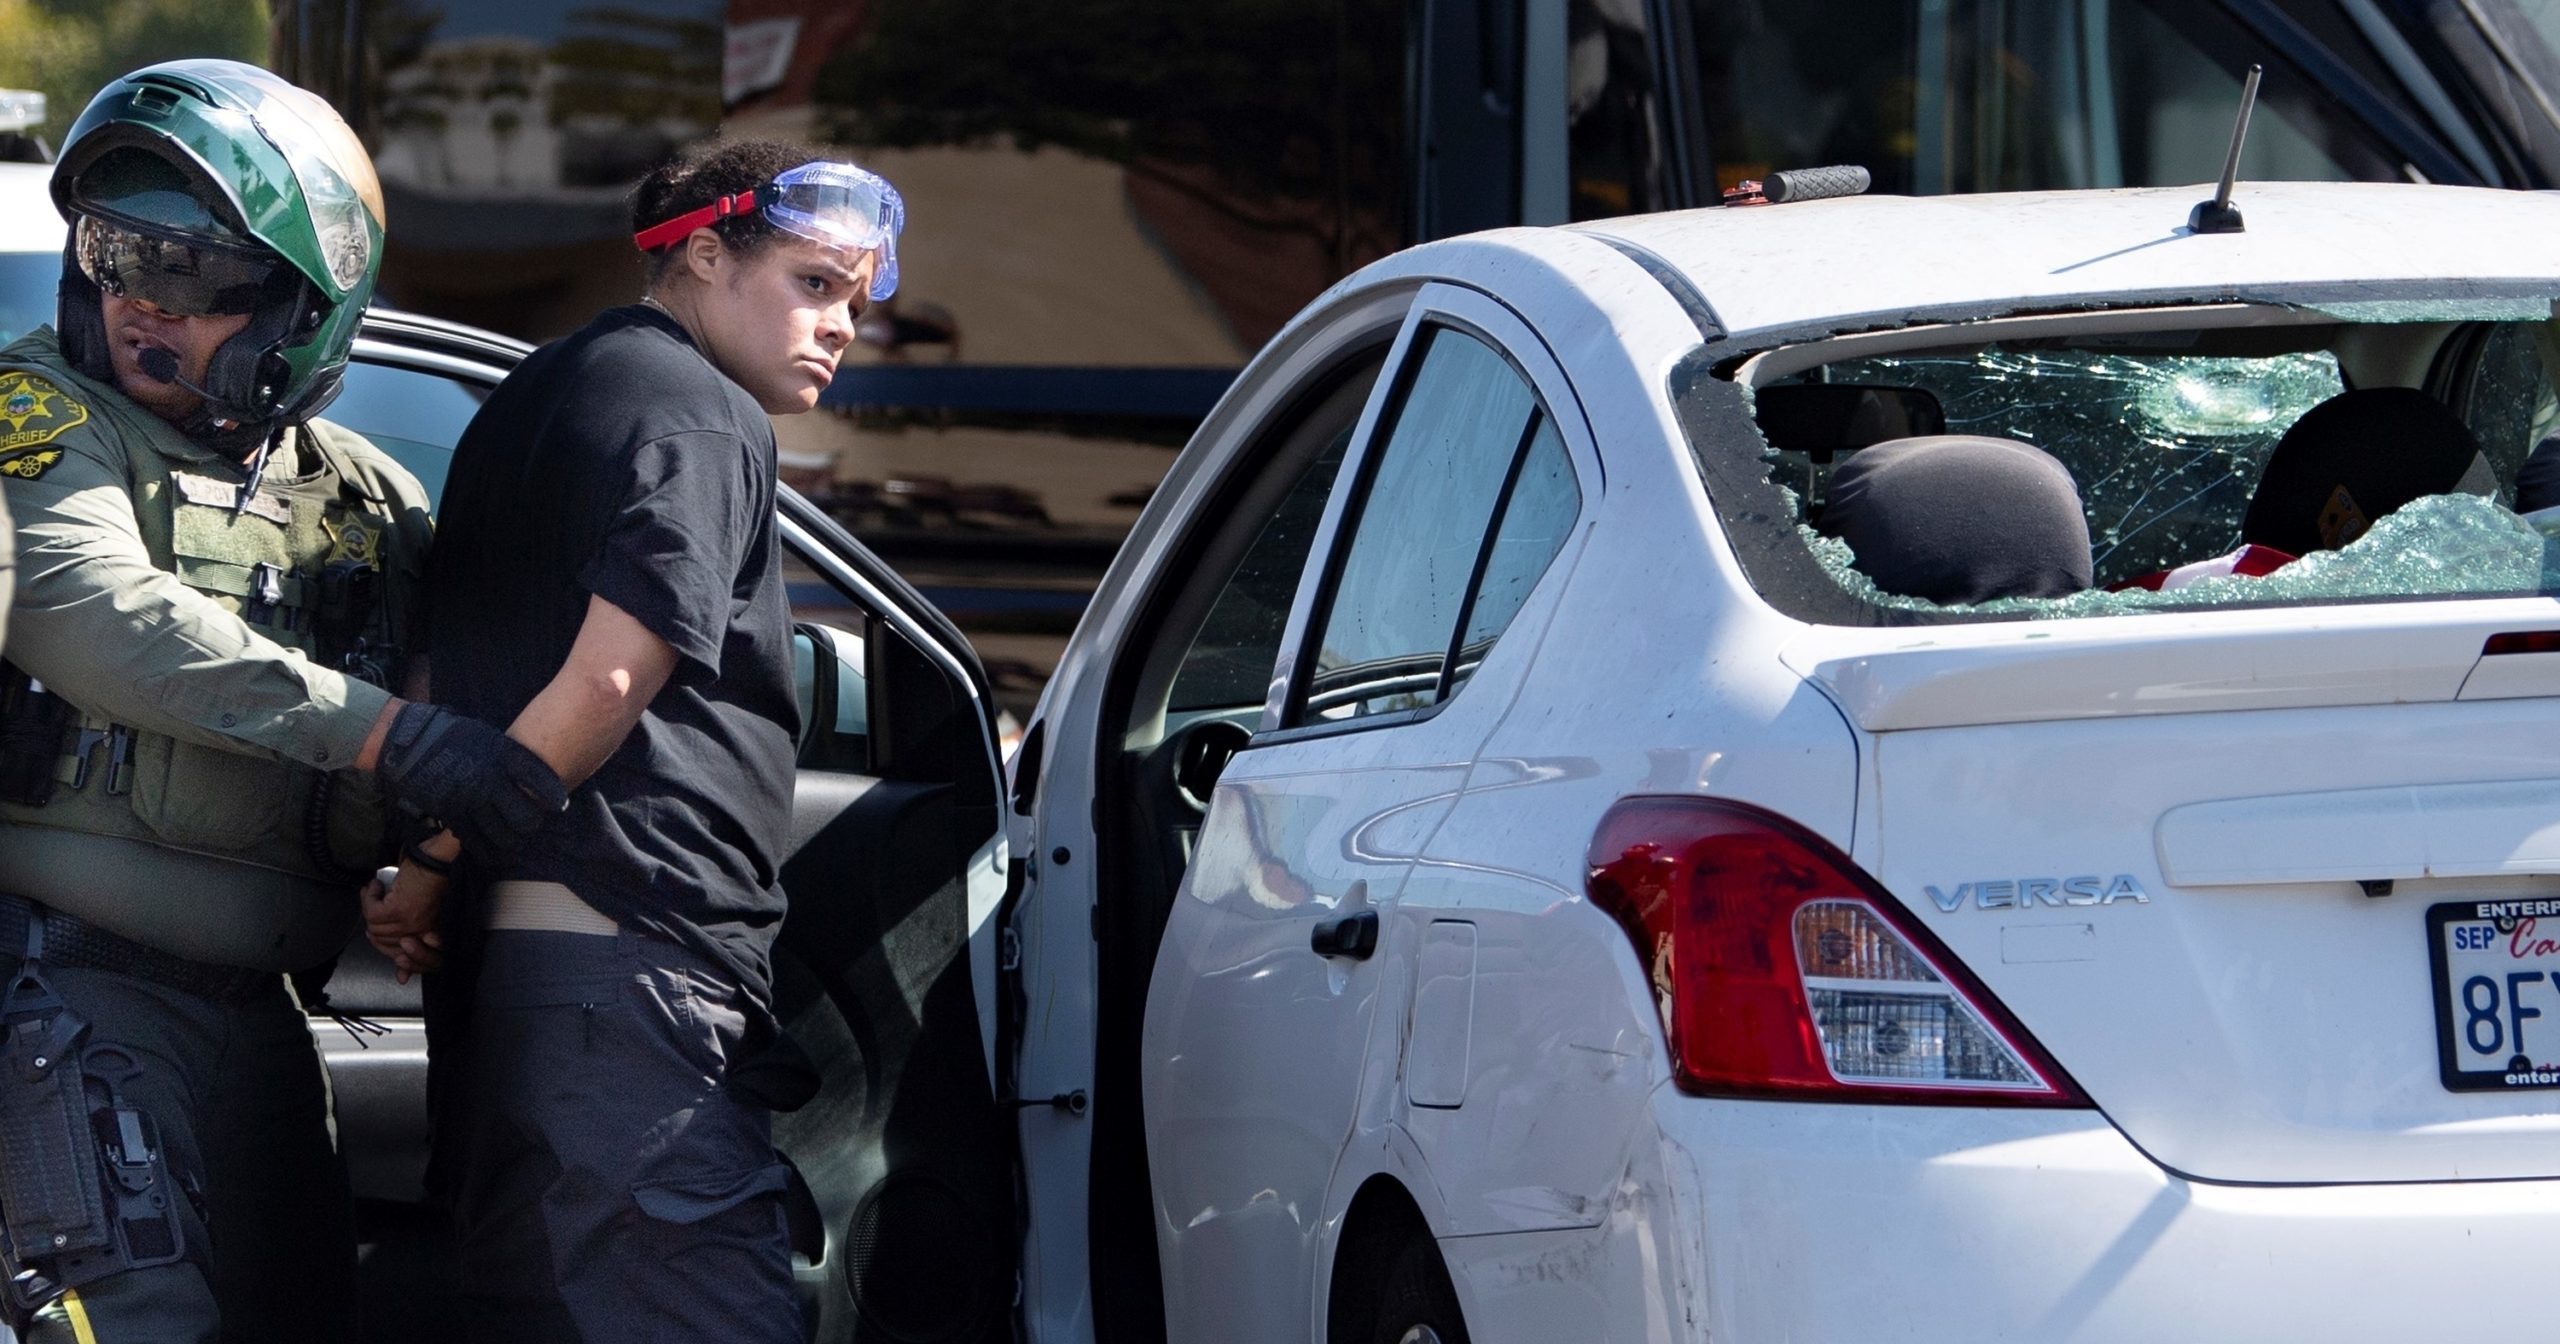 Tatiana Turner is taken into custody after witnesses said she drove her car into a crowd of protesters in Yorba Linda, California, on Sept. 26, 2020.